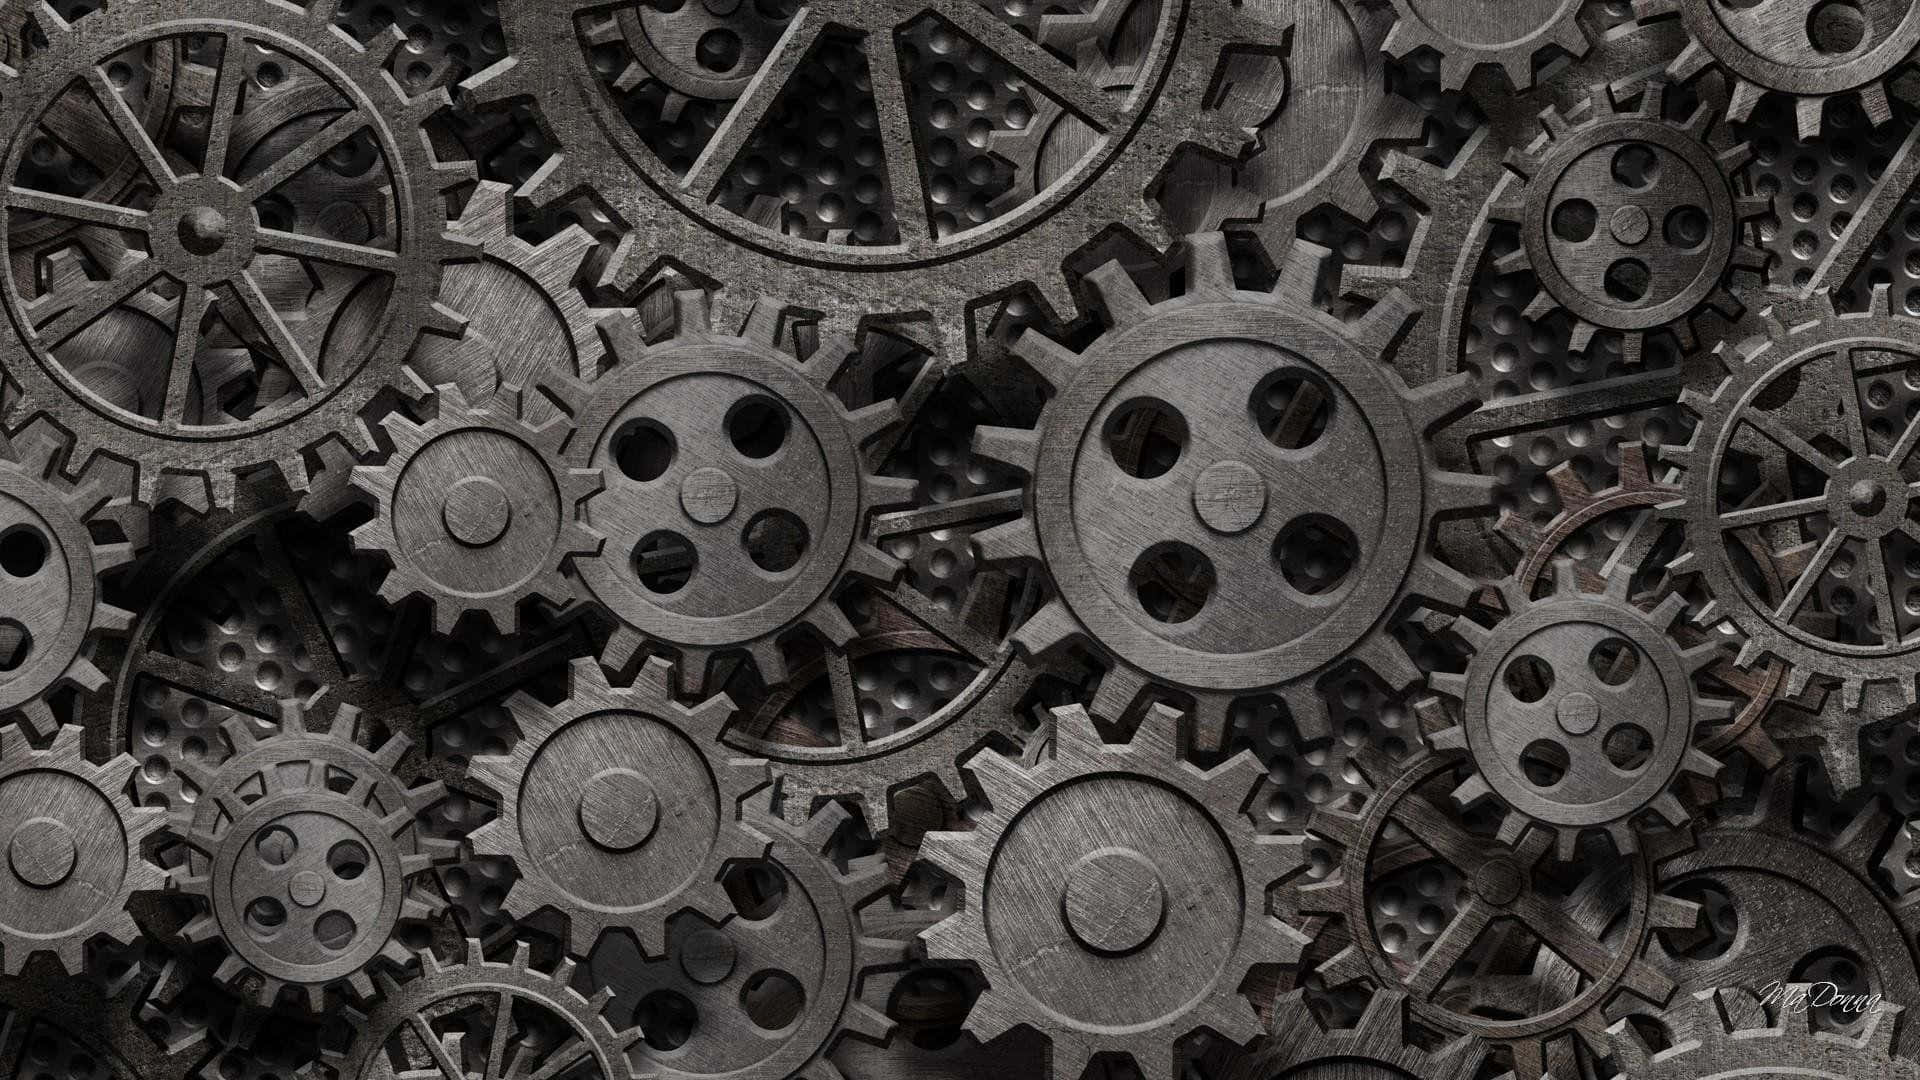 A Close Up Of Many Gears And Gears Wallpaper